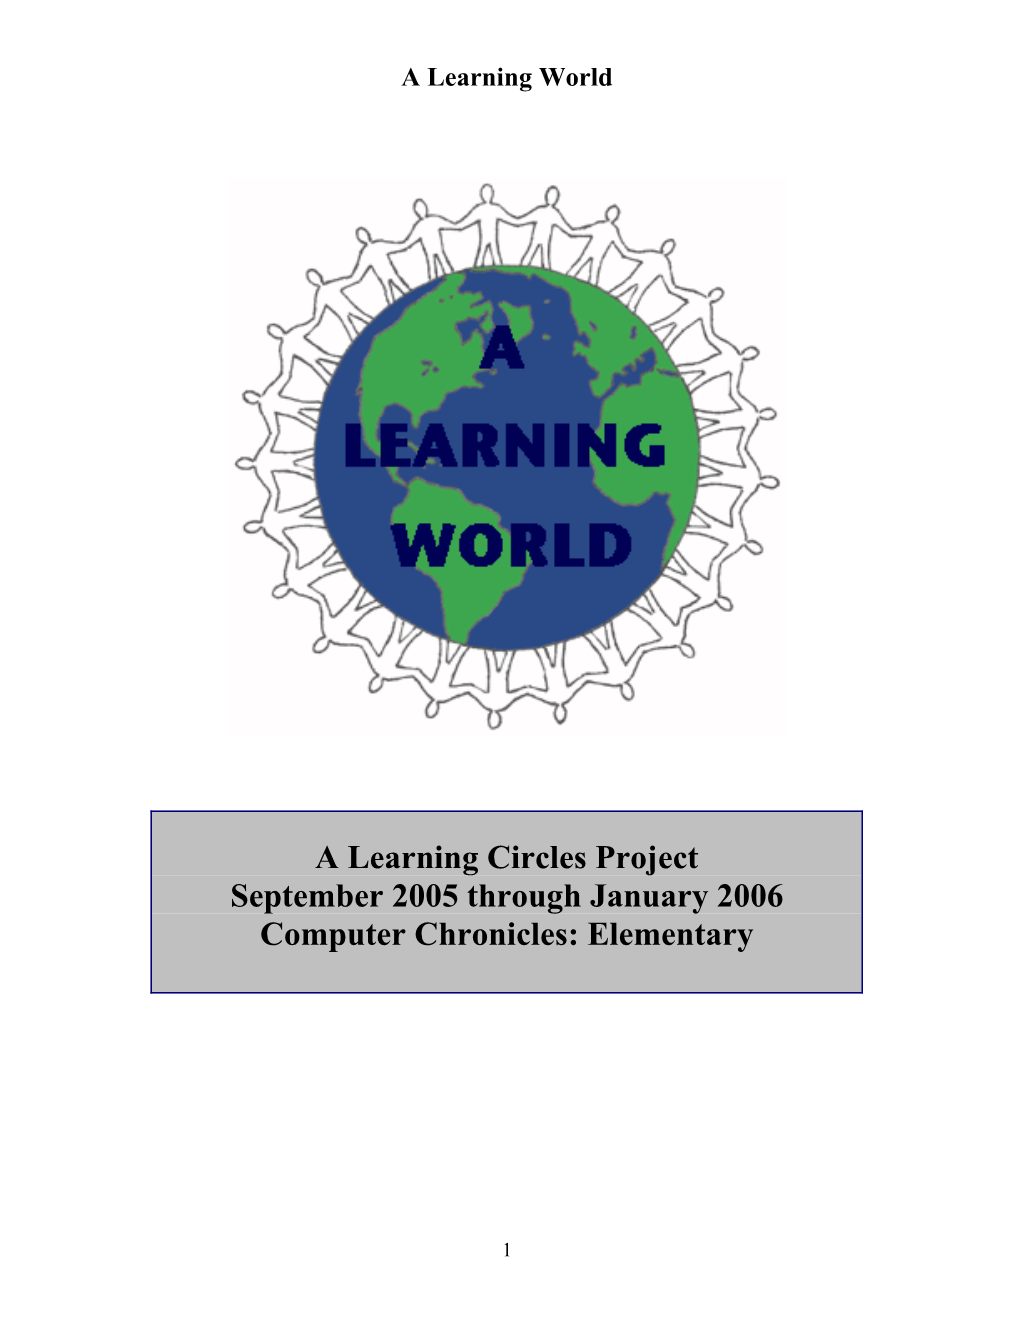 A Learning World